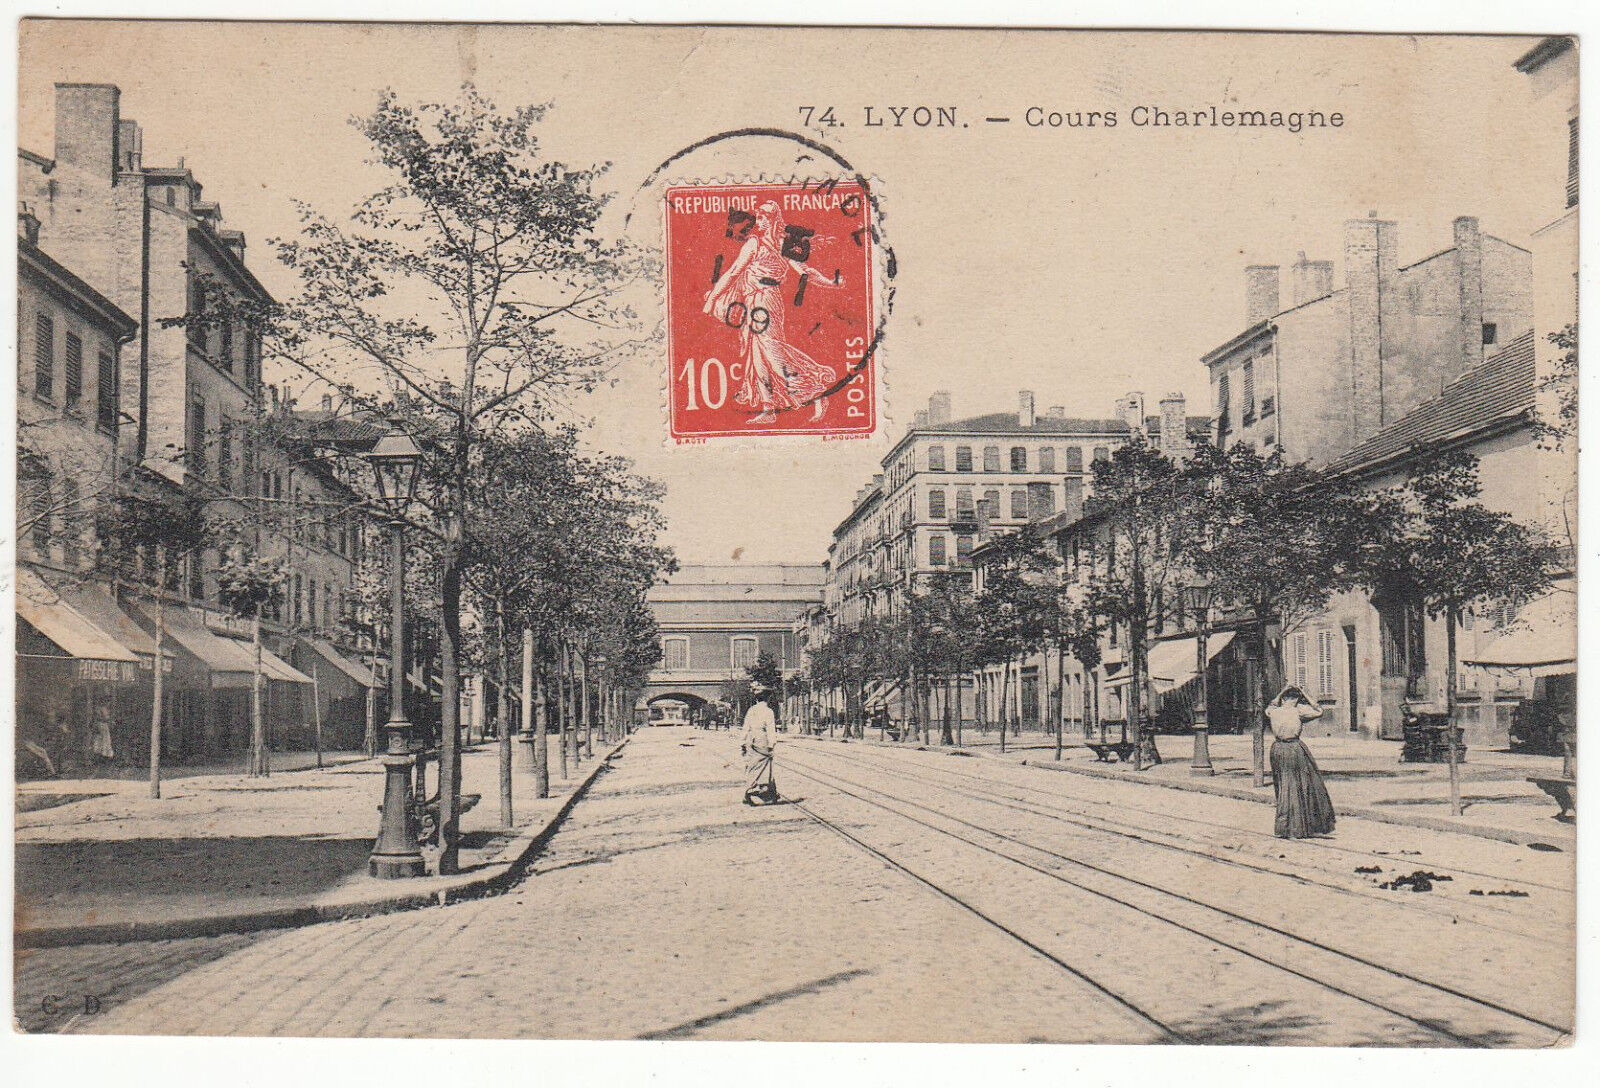 CARTE POSTALE LYON COURS CHARLEMAGNE 401220157027